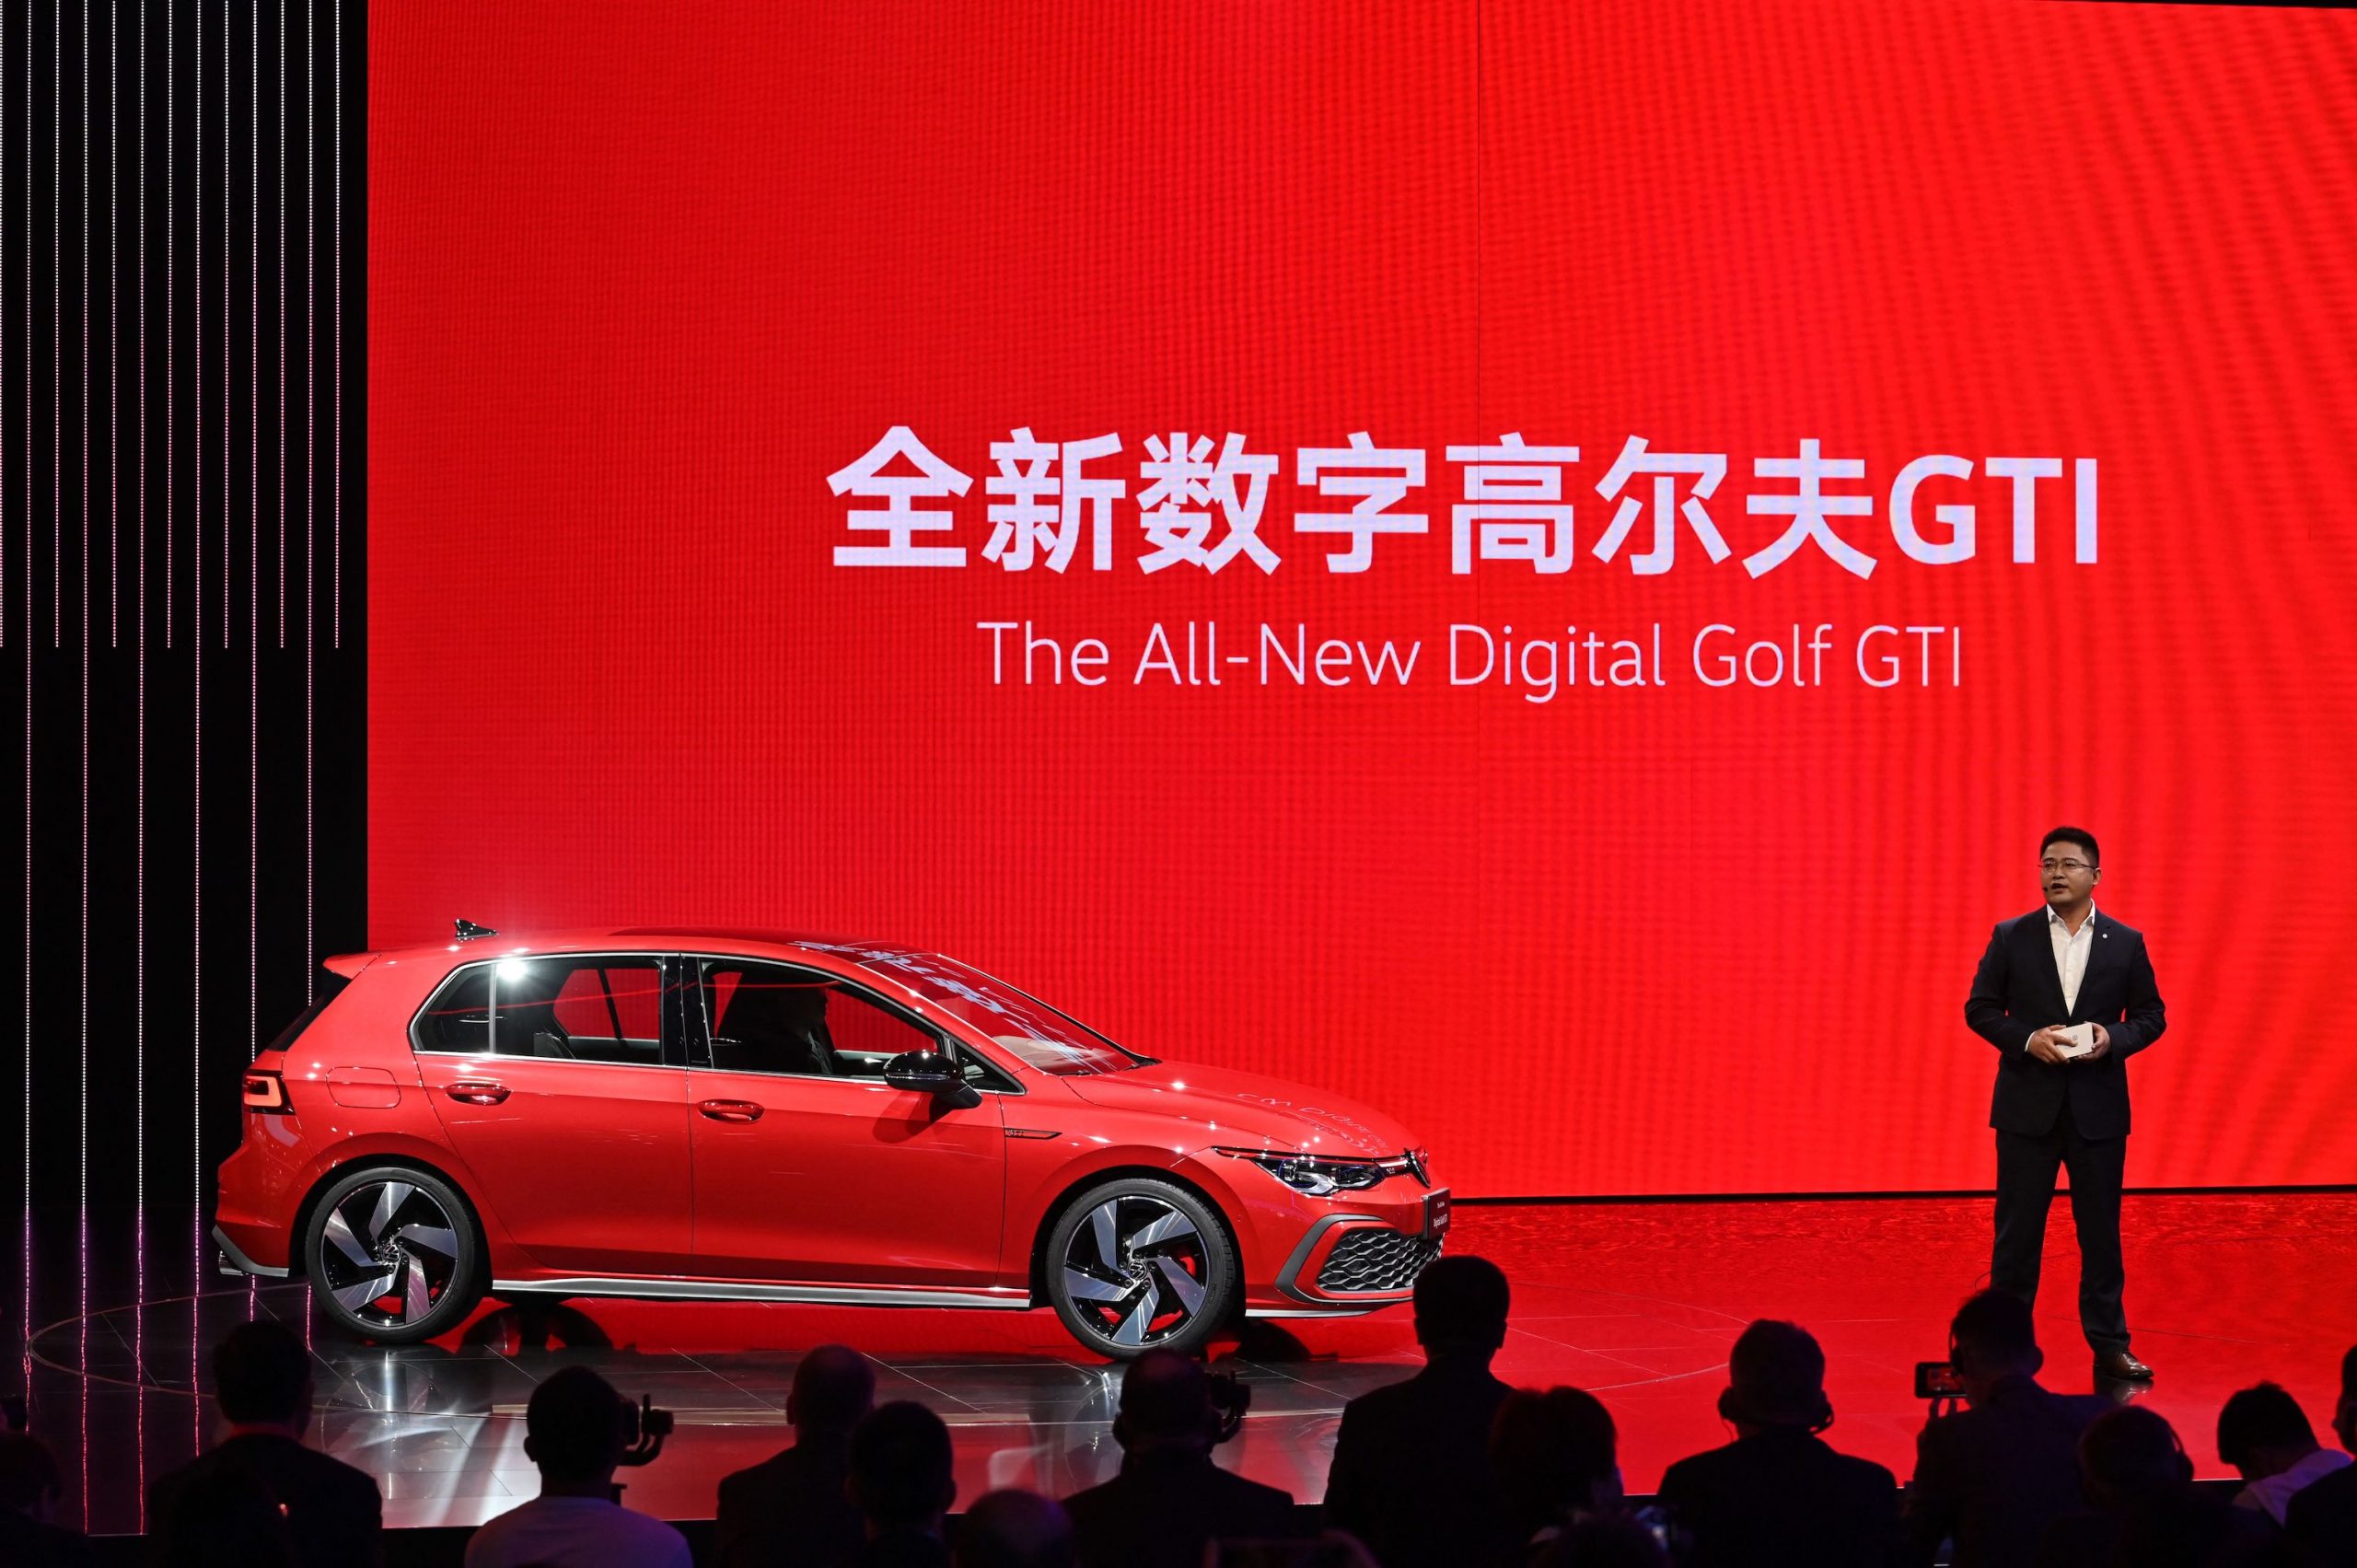 Guo Yongfeng, President of Faw-Volkswagen Sales, presents the new red Volkswagen Golf GTI car during the 19th Shanghai International Automobile Industry Exhibition in Shanghai